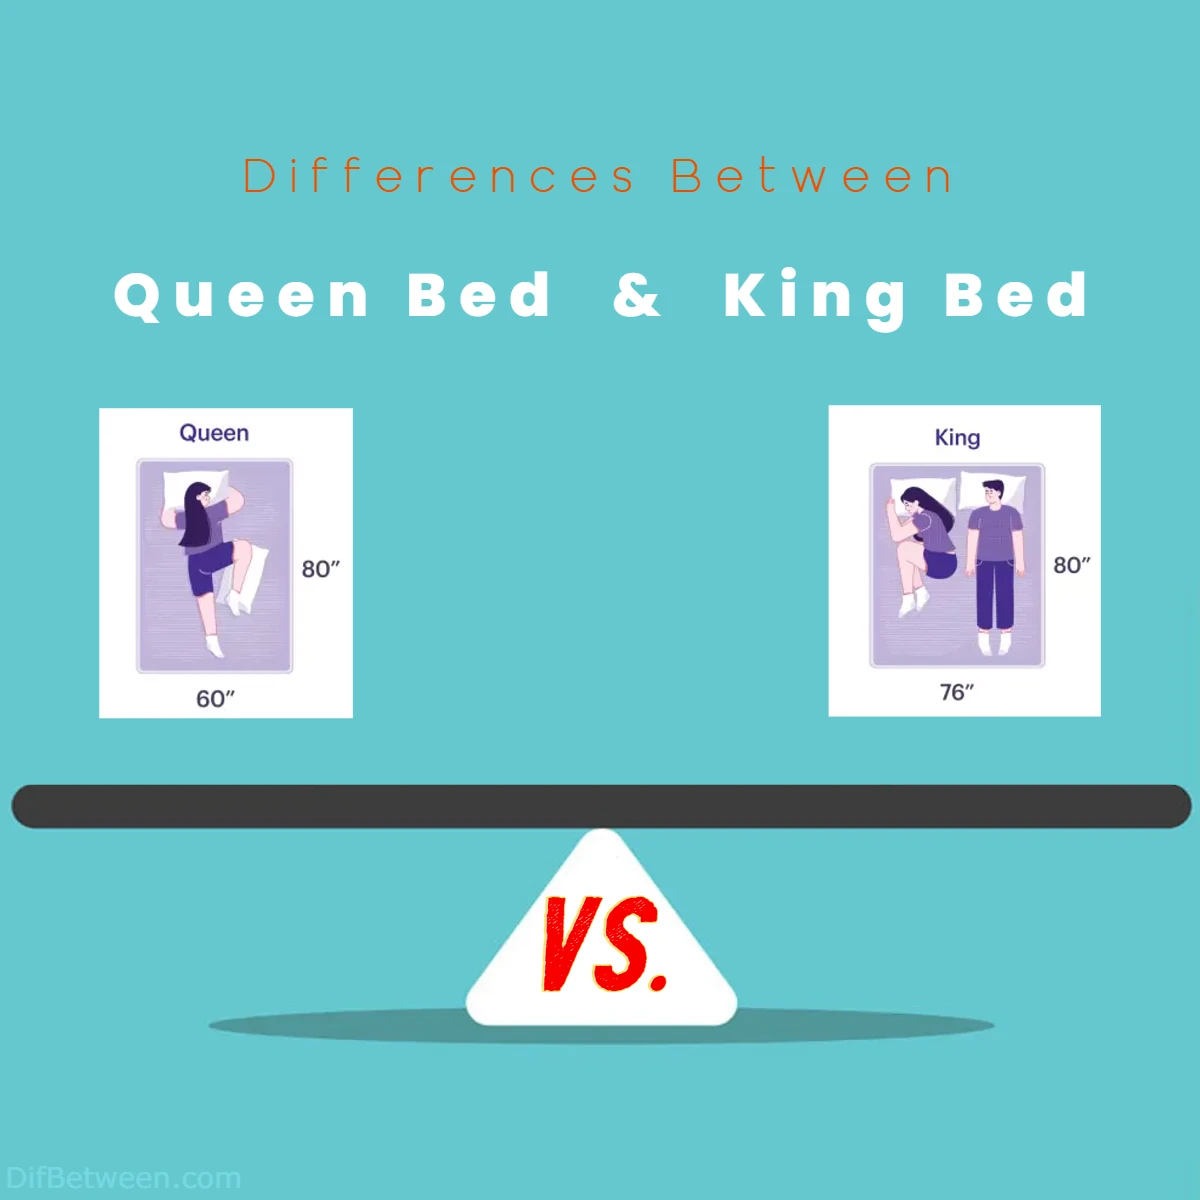 Differences Between Queen Bed vs King Bed